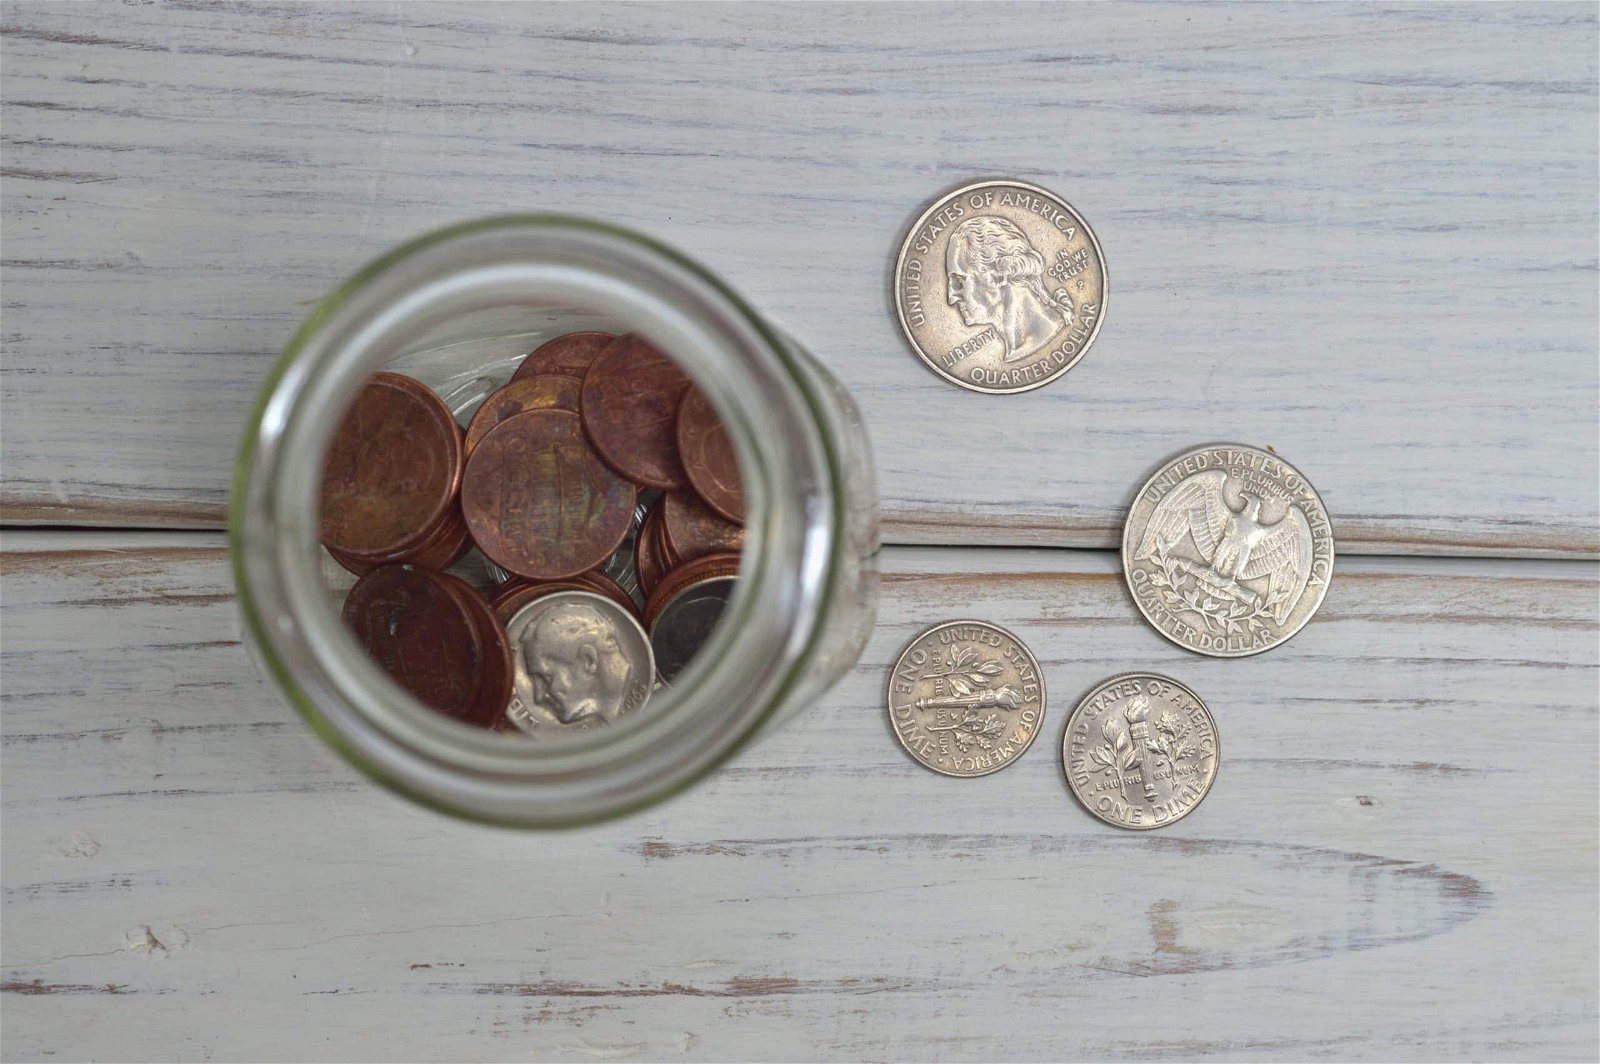 Top view of a glass jar filled with copper pennies next to various silver coins on a wooden surface.